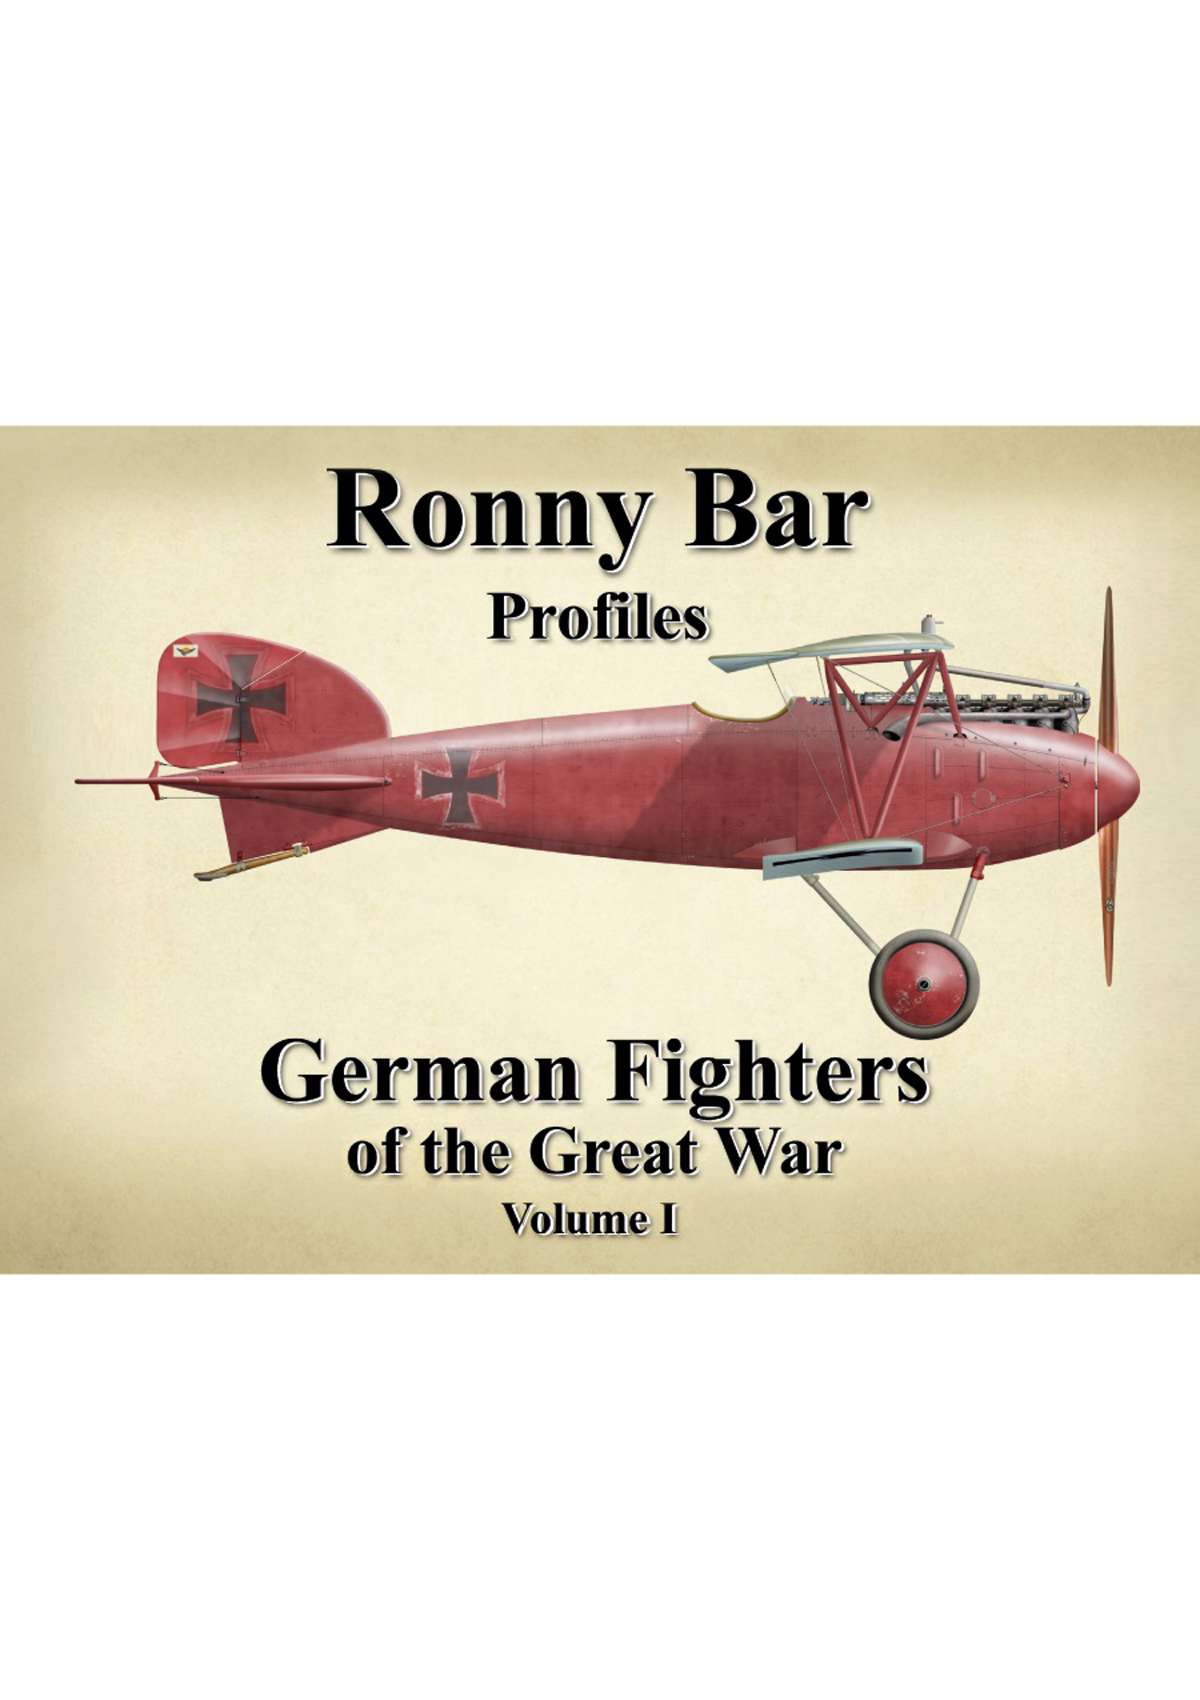 Book: Ronny Bar Profiles - German Fighters of the Great War Vol 1